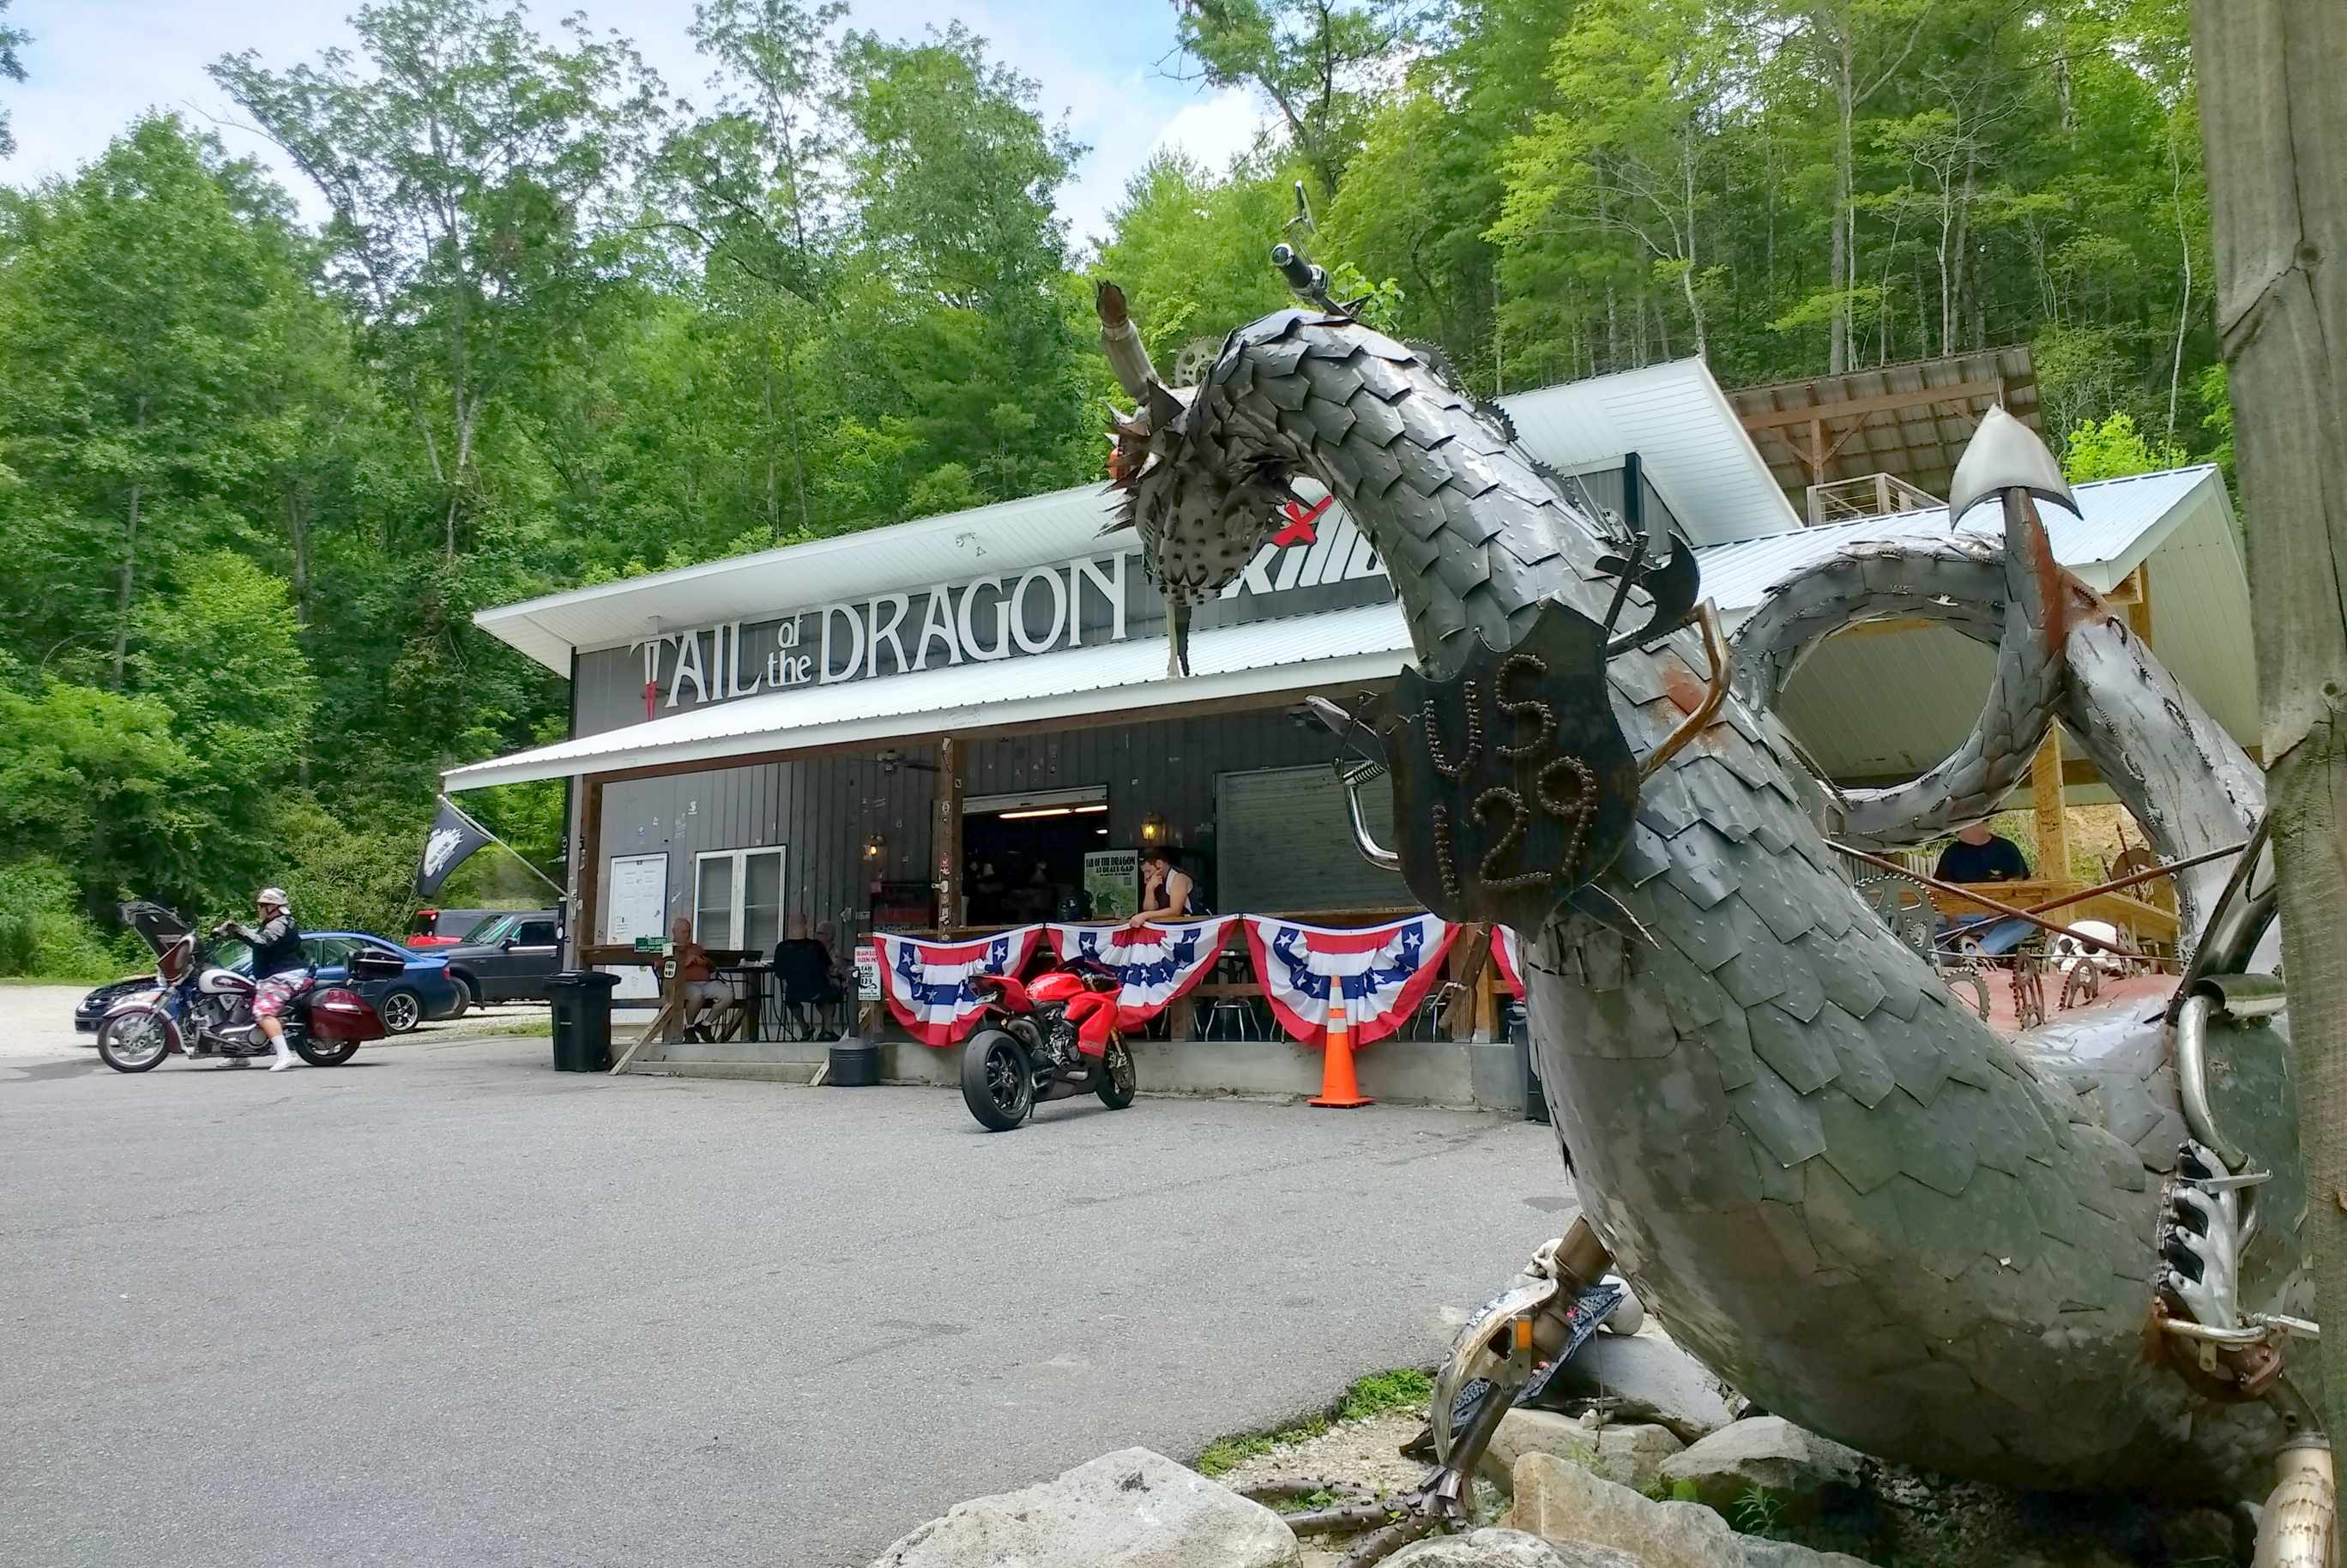 Riding U.S. Highway 129’s Tail of the Dragon in Tennessee/North Carolina